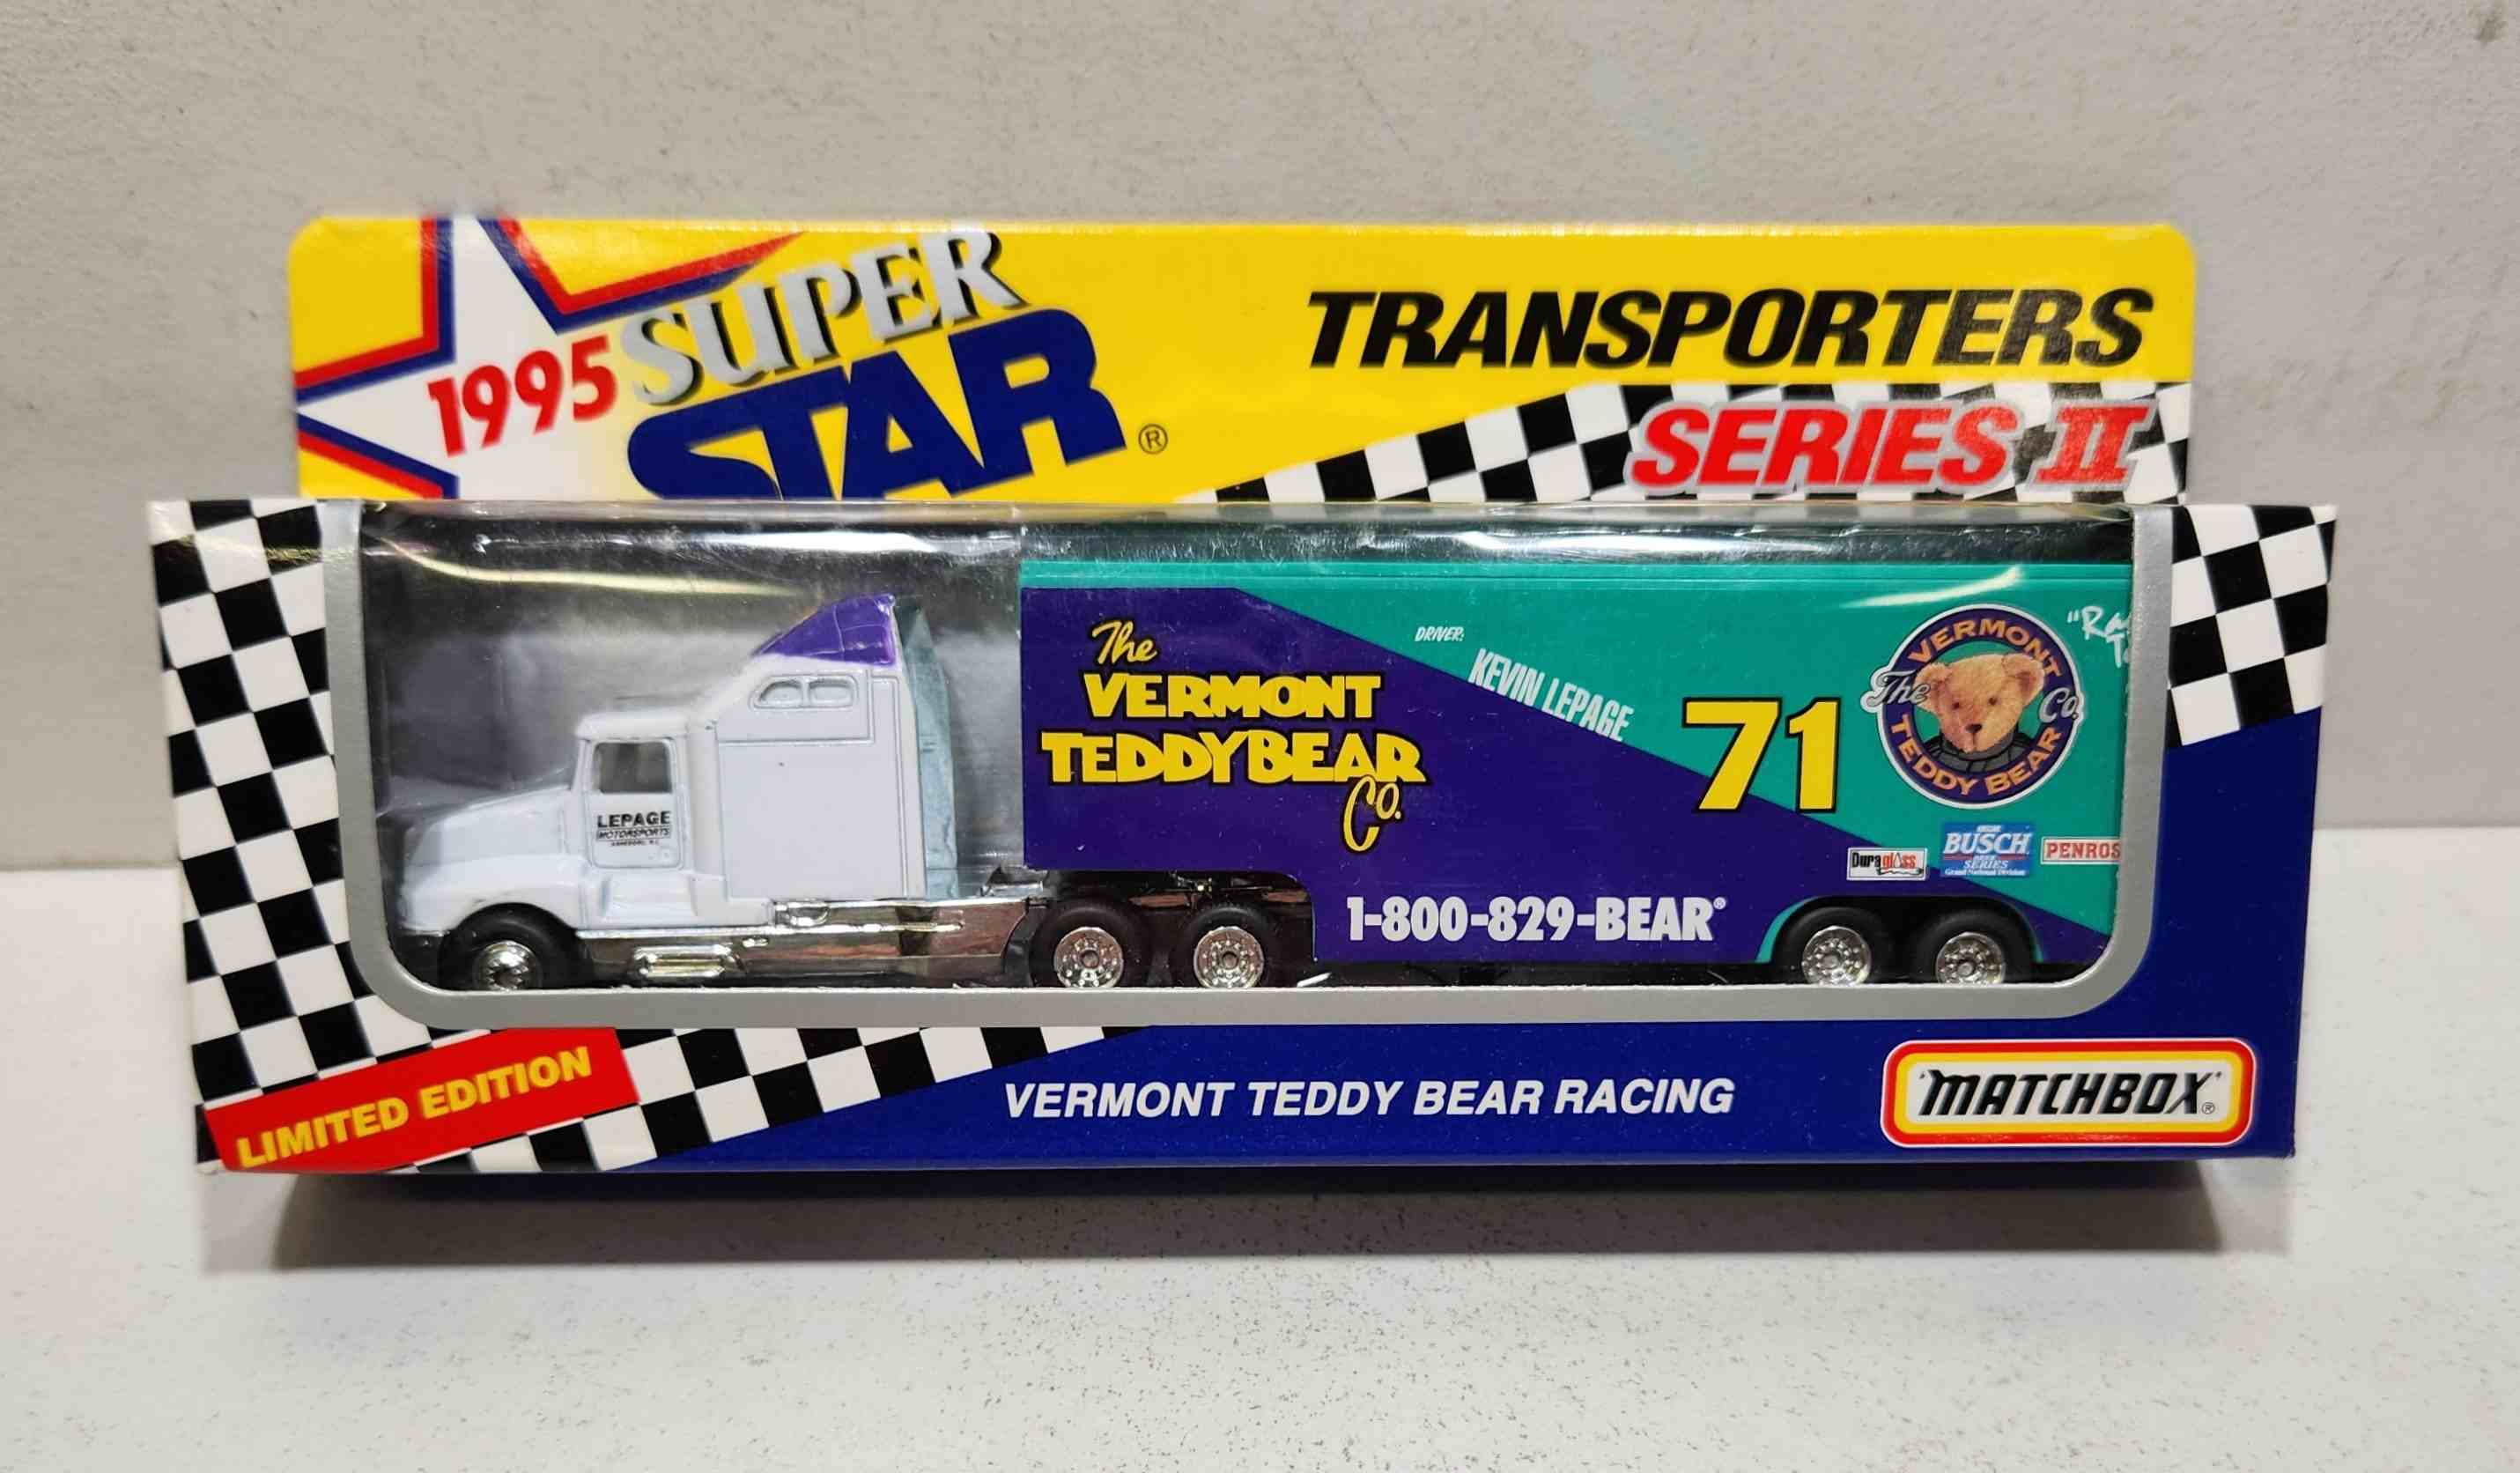 1995 Kevin LaPage 1/80th Vermont Teddy Bear Co "Busch Series" Transporter